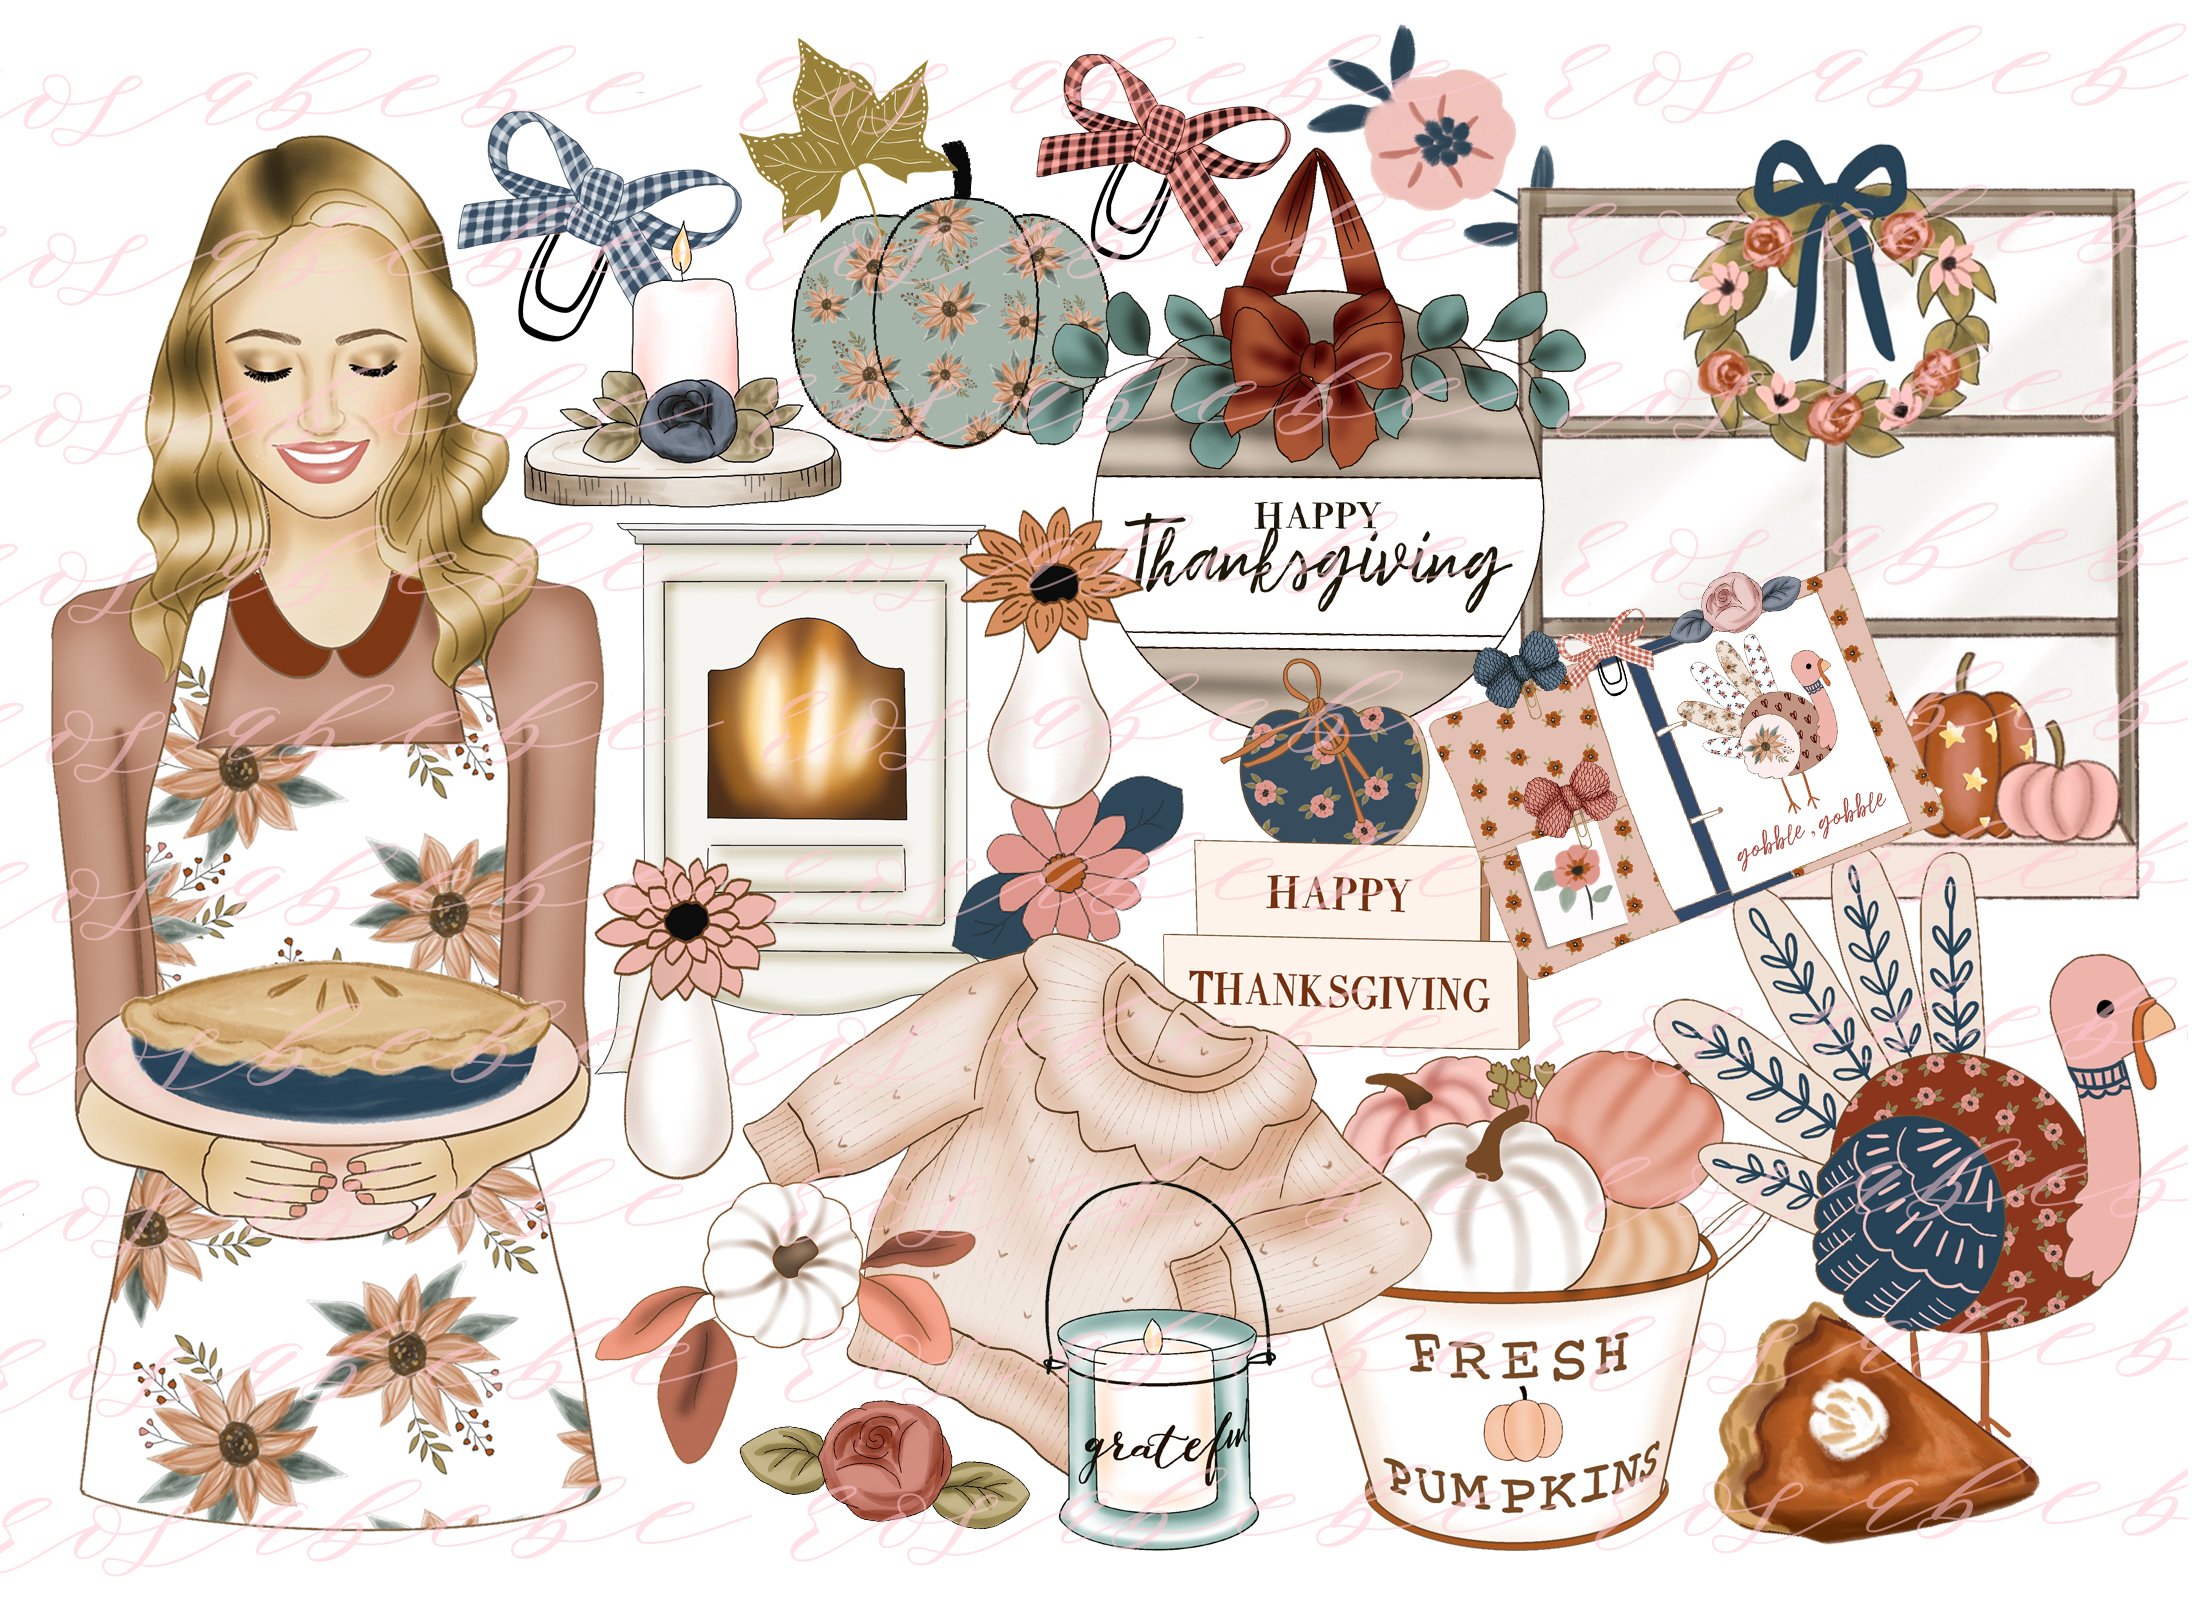 Diverse of pastel elements for perfect modern Thanksgiving illustration.